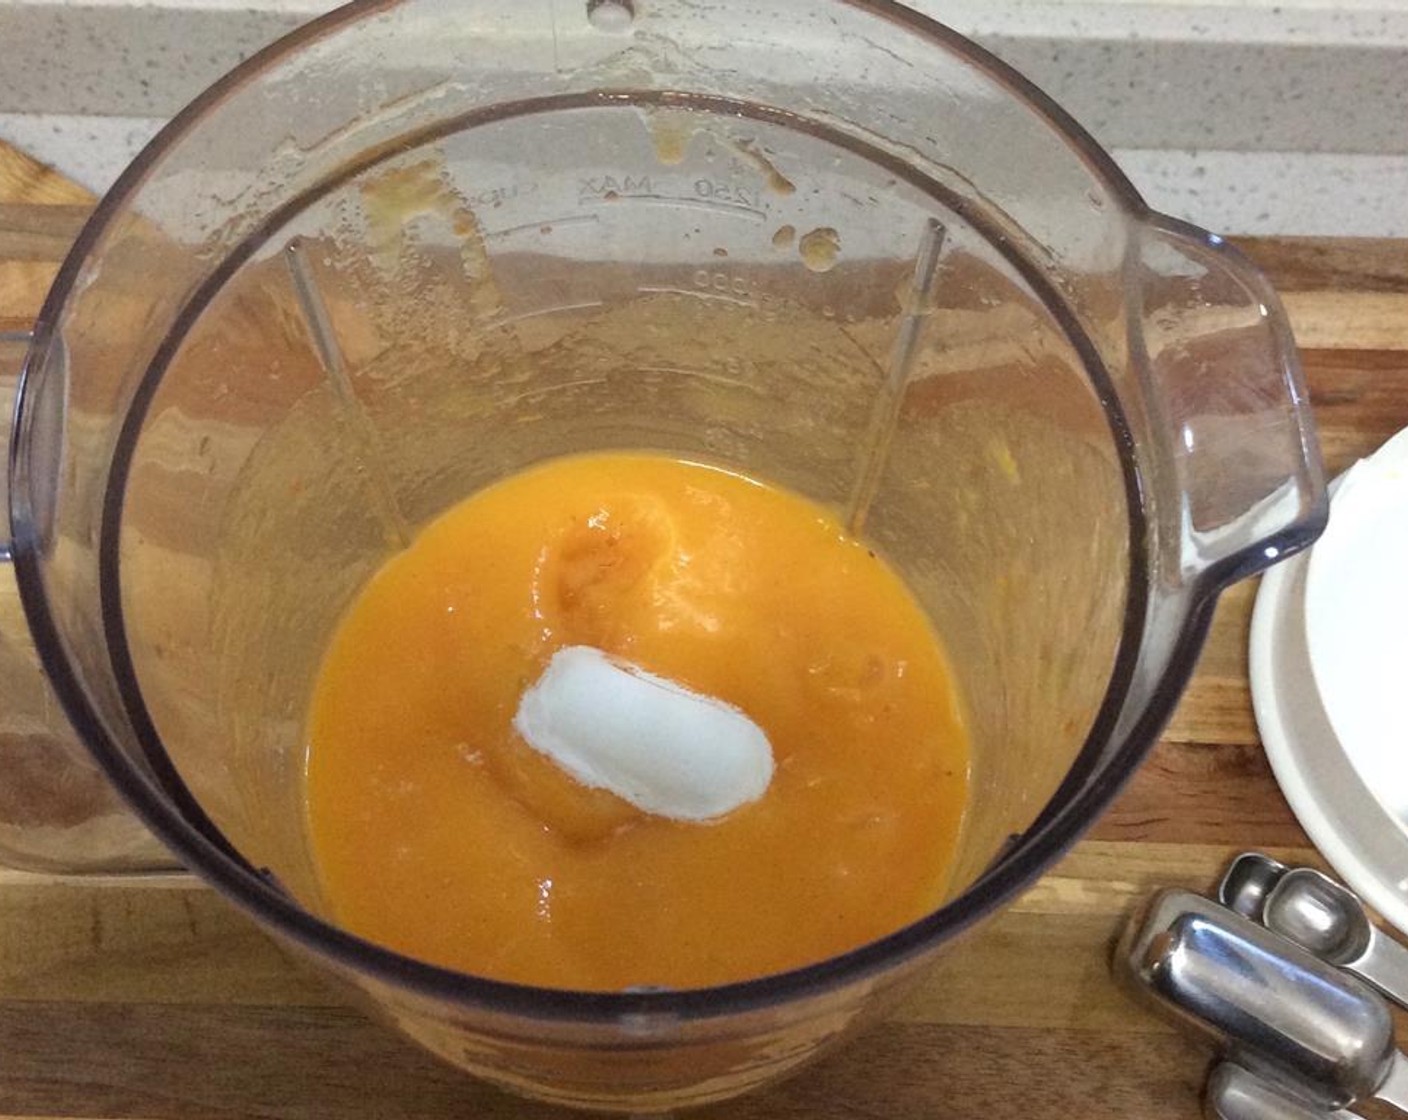 step 3 Dissolve the Baking Soda (1 tsp) in the persimmon and set aside.